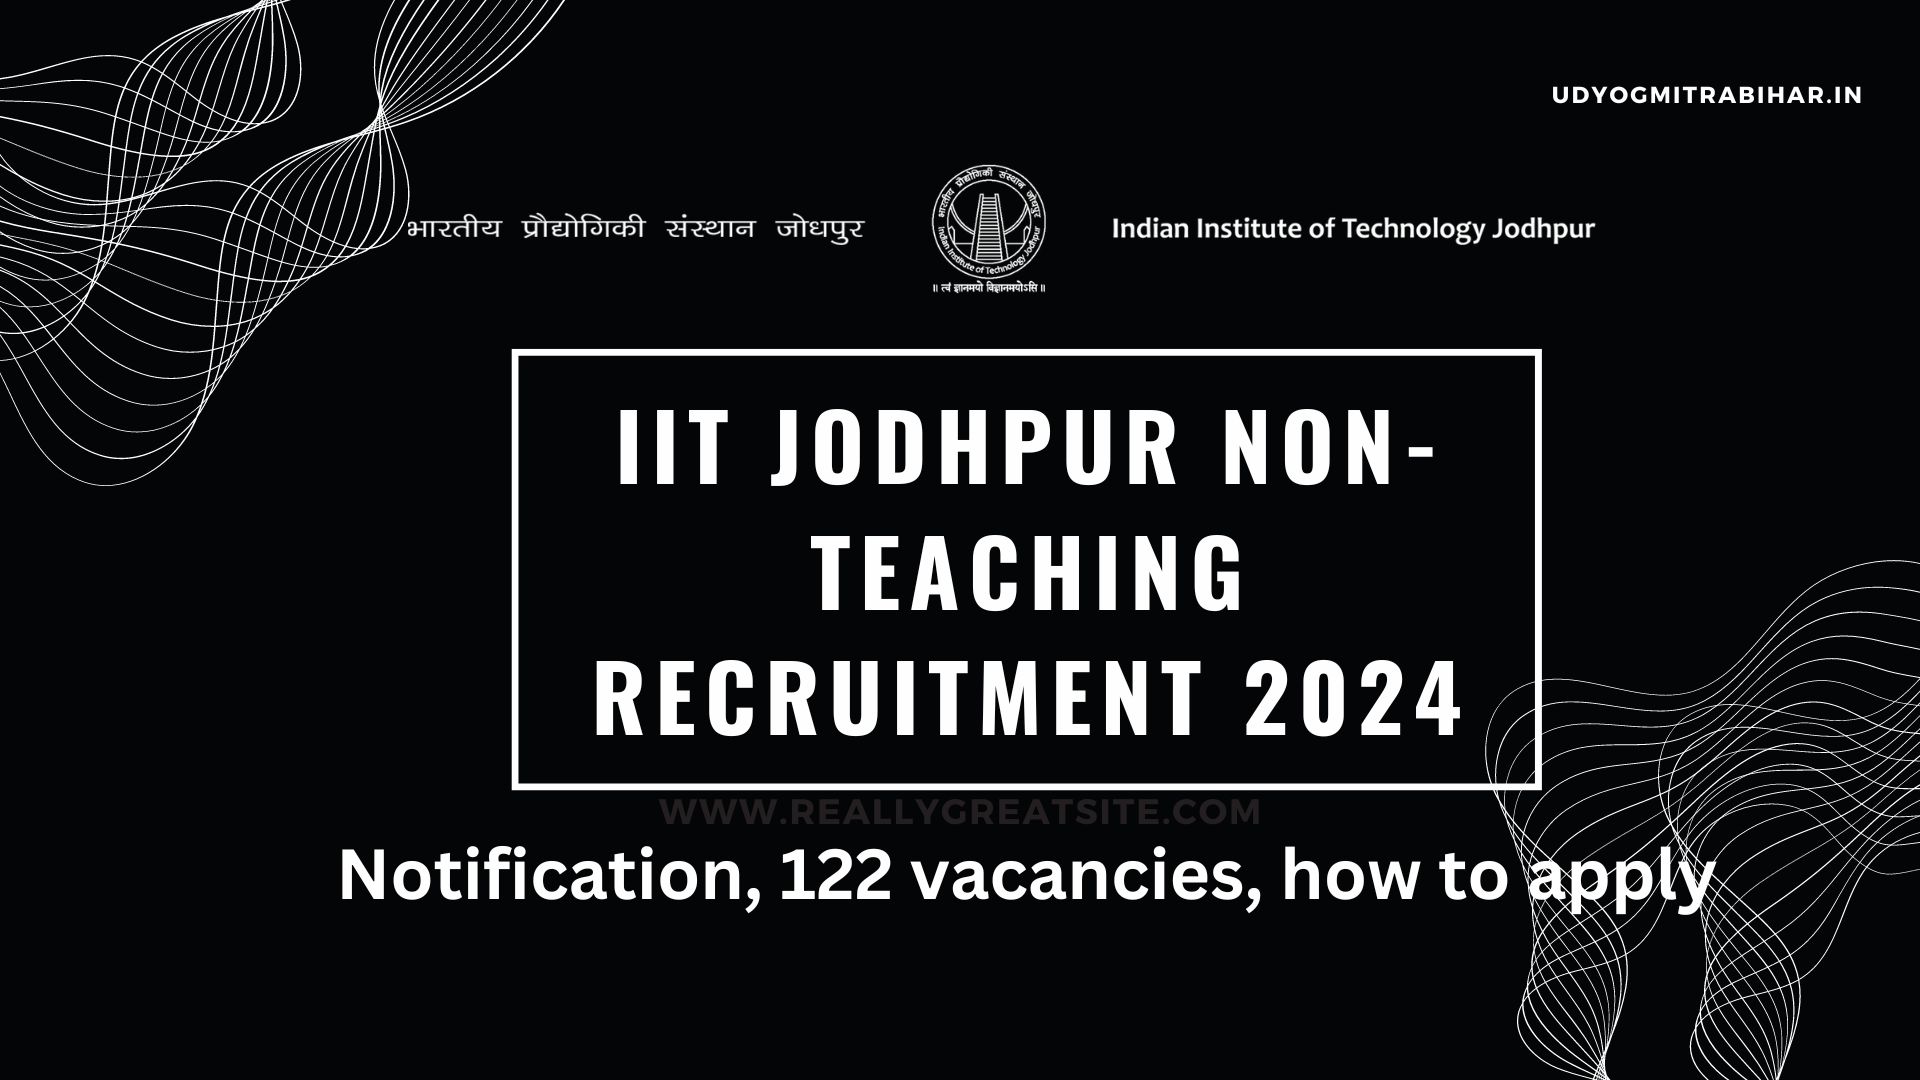 IIT Jodhpur Technical and Administrative Non-Teaching Vacancy 2024 for 122 Vacant Posts, Apply Now, Eligibility Criteria, Salary